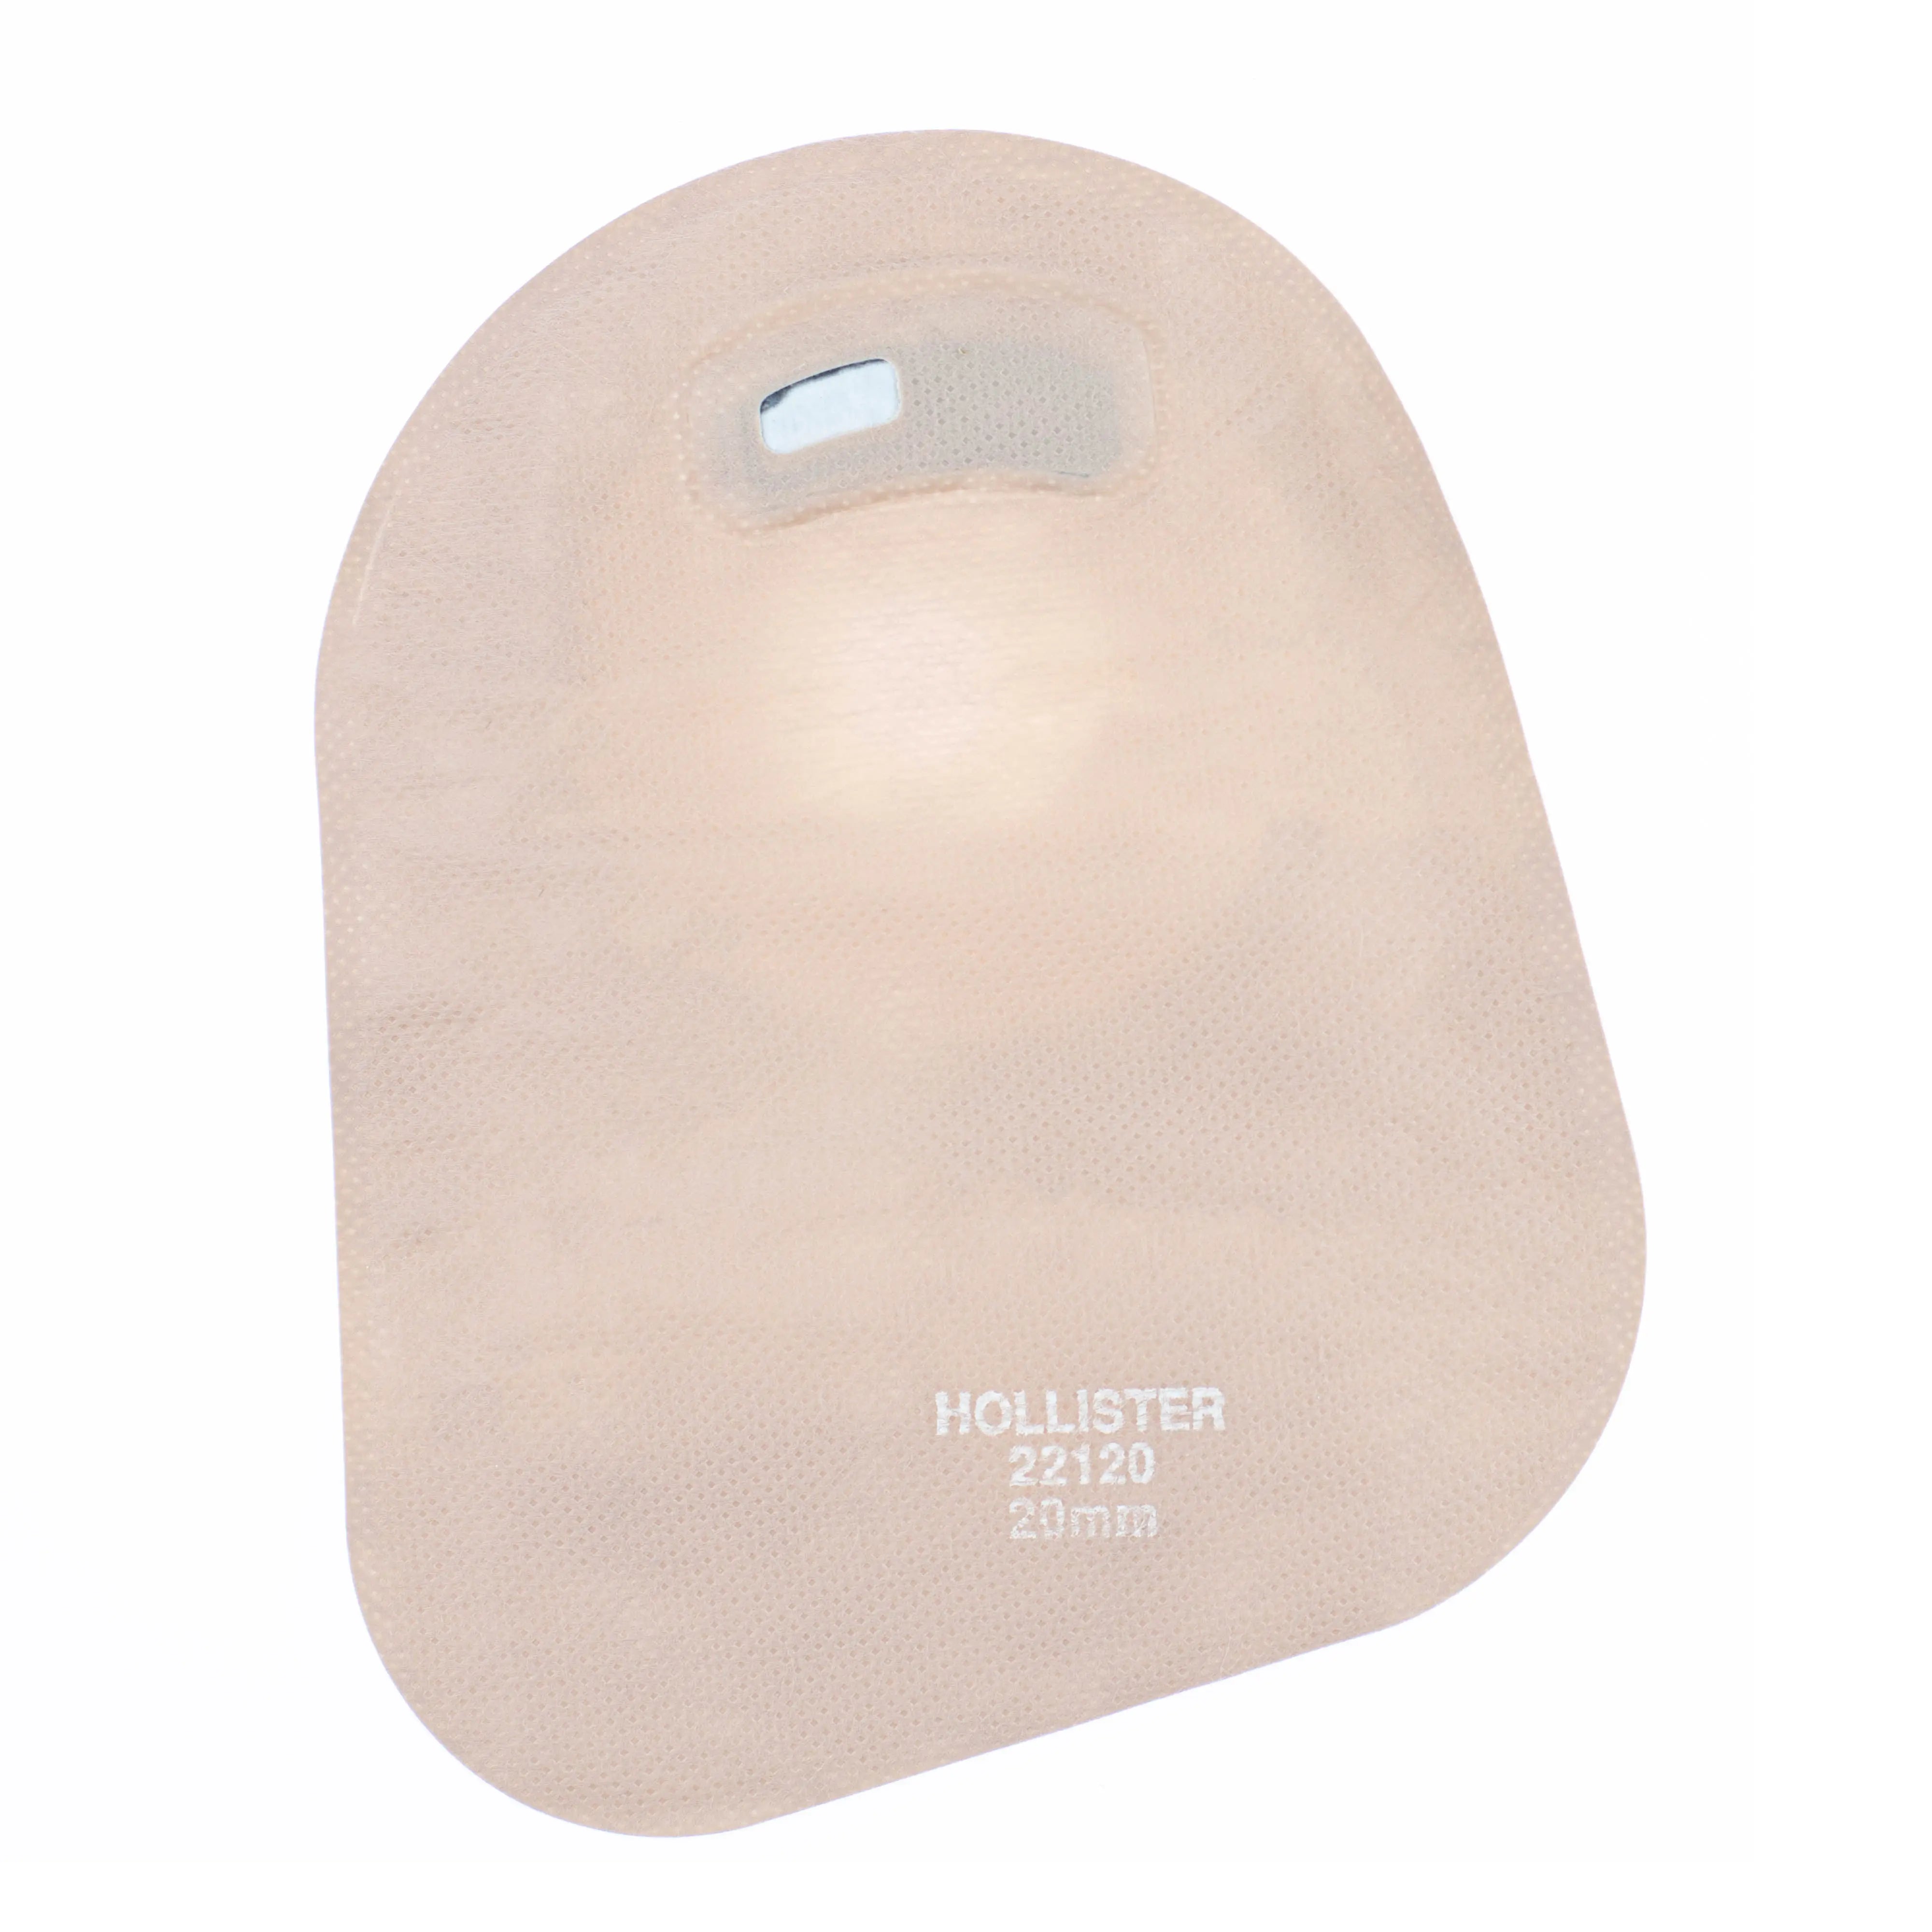 Hollister Premier OnePiece 12 Drainable Ostomy Pouch  Convex Flextend  Barrier Lock n Roll Closure Tape Filter Opening Presized 134  Beige Box of 5  Walmartcom